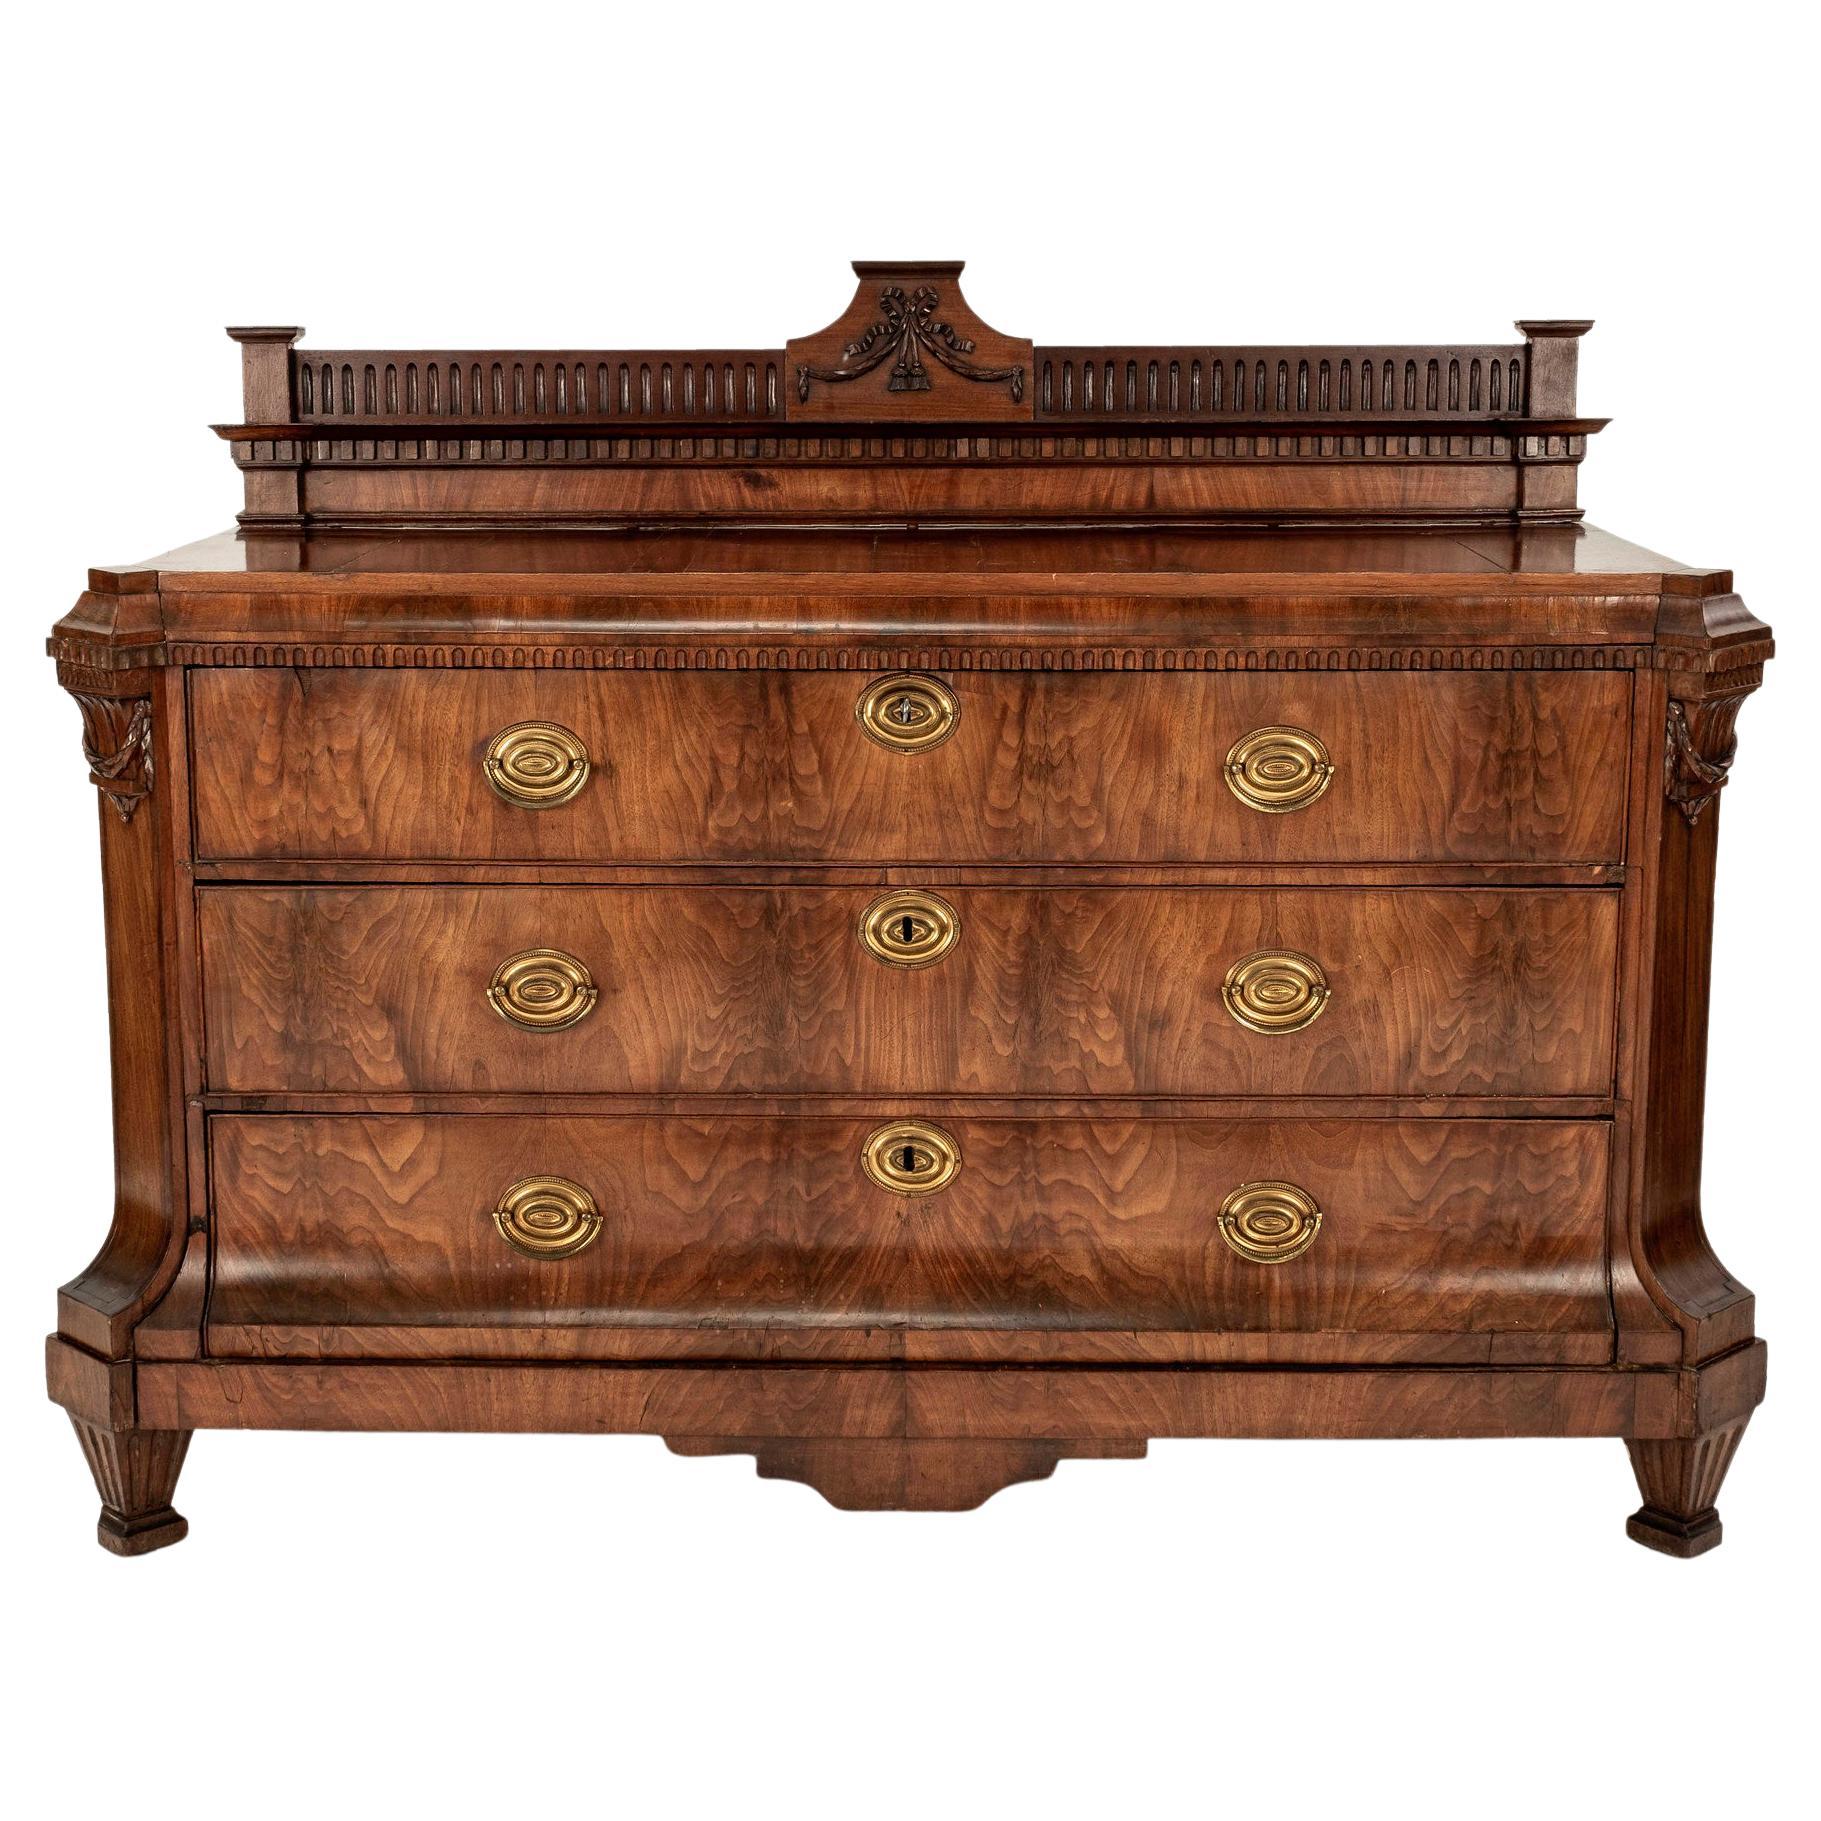 19th Century Neoclassical Commode